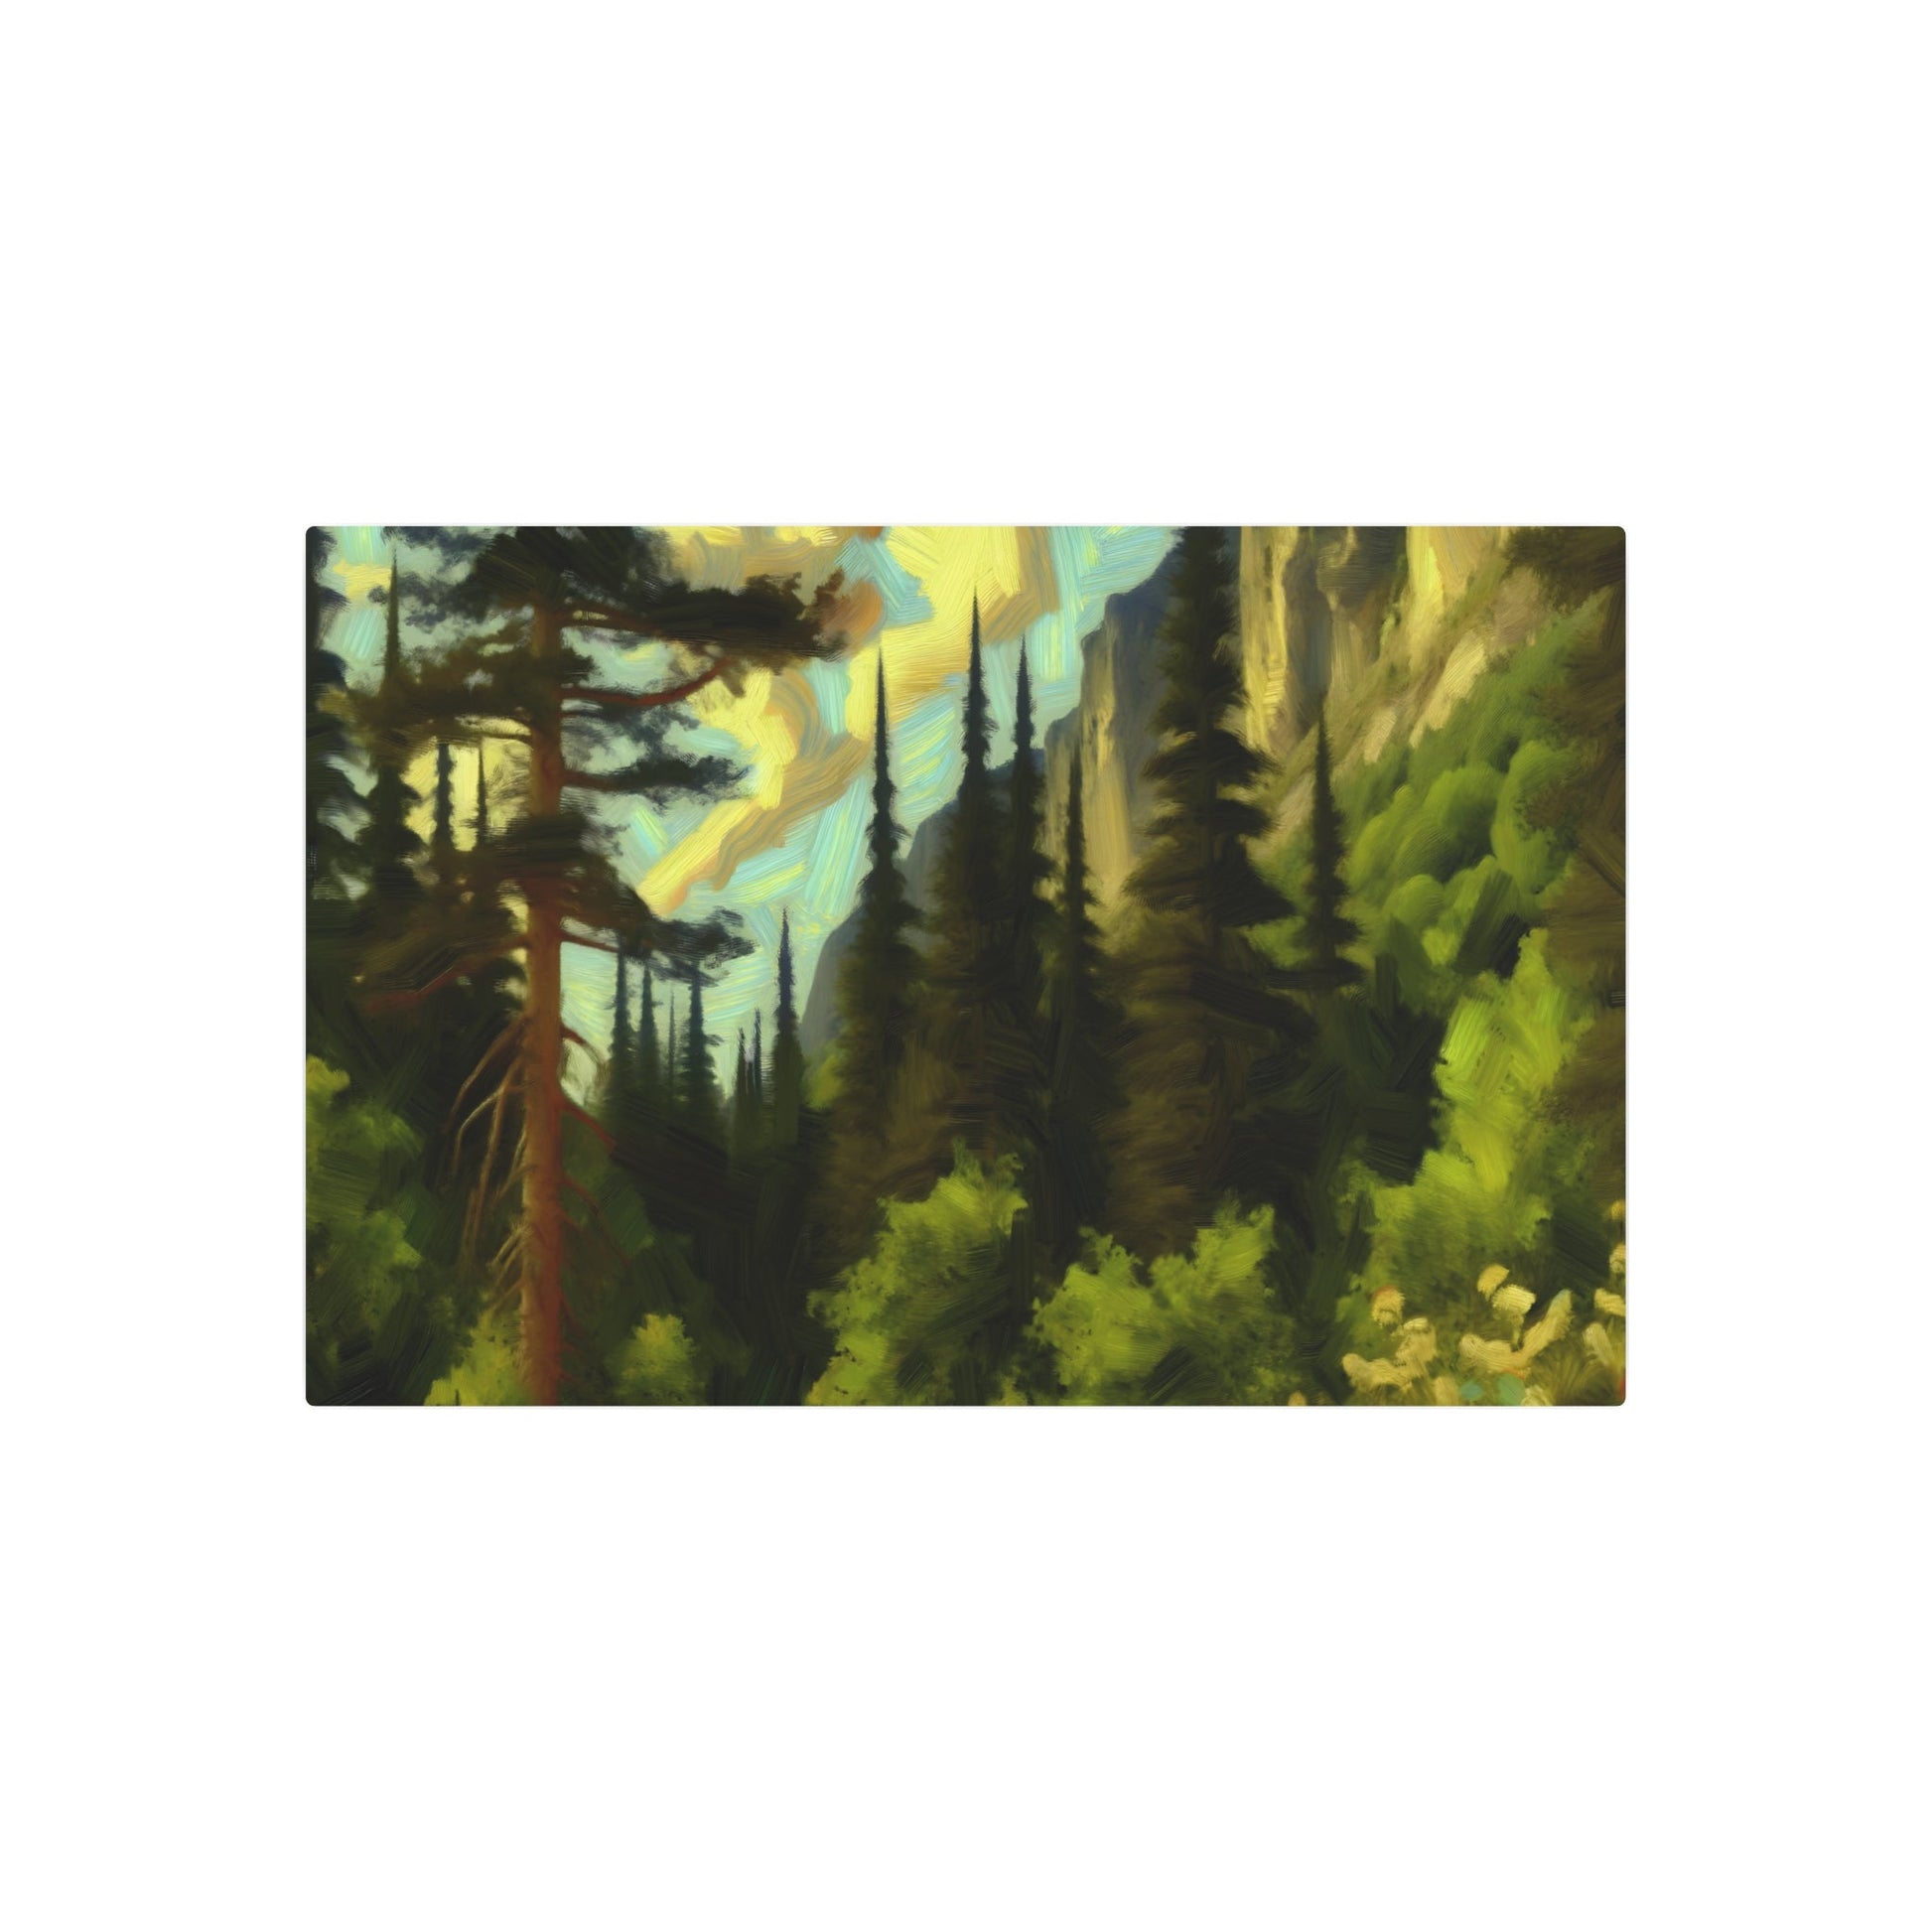 Metal Poster Art | "Romanticism Art Style - Stunning Western Art Depicting Trees and Forests" - Metal Poster Art 36″ x 24″ (Horizontal) 0.12''